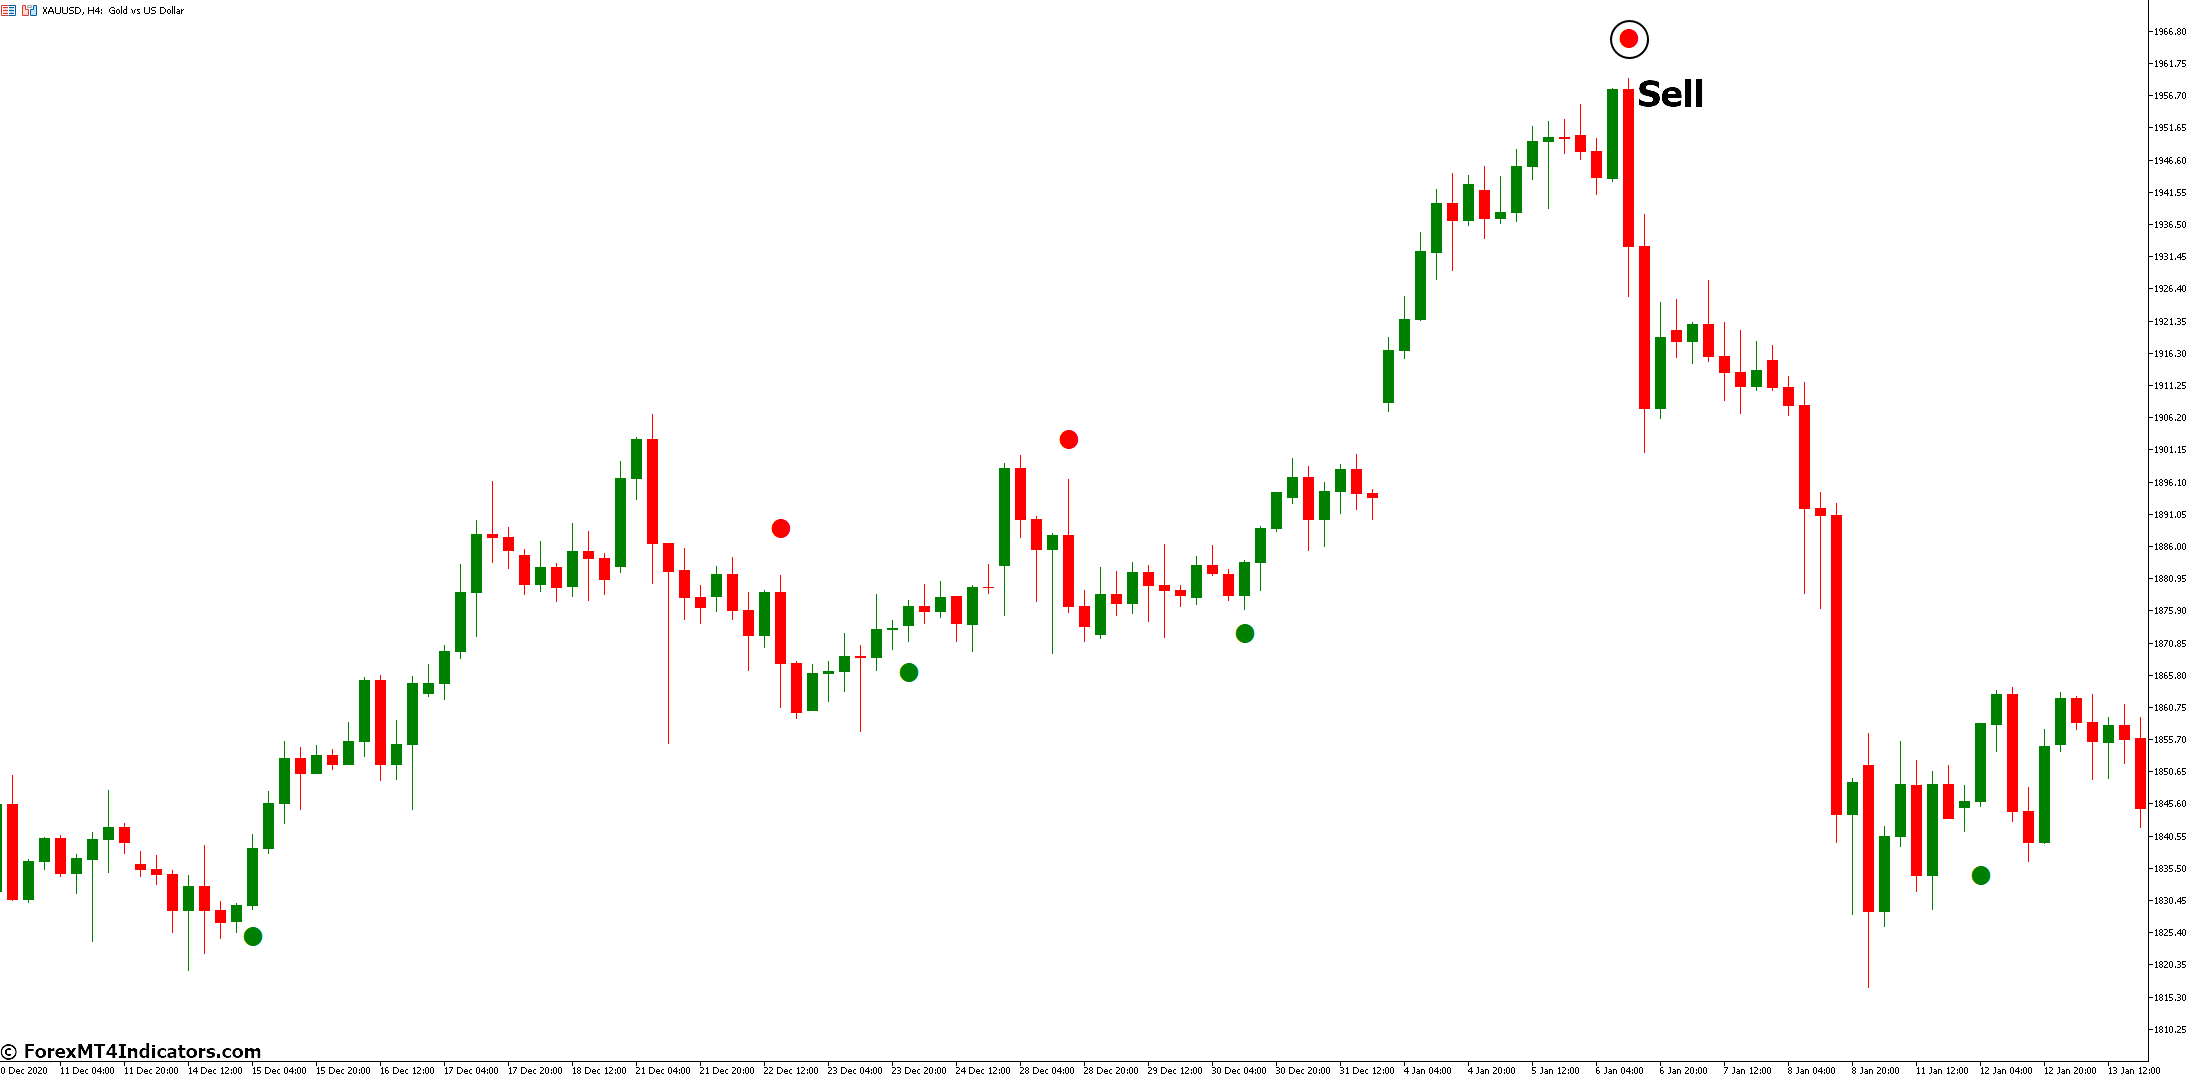 How to Trade with Silver Trend Signal Indicator - Sell Entry